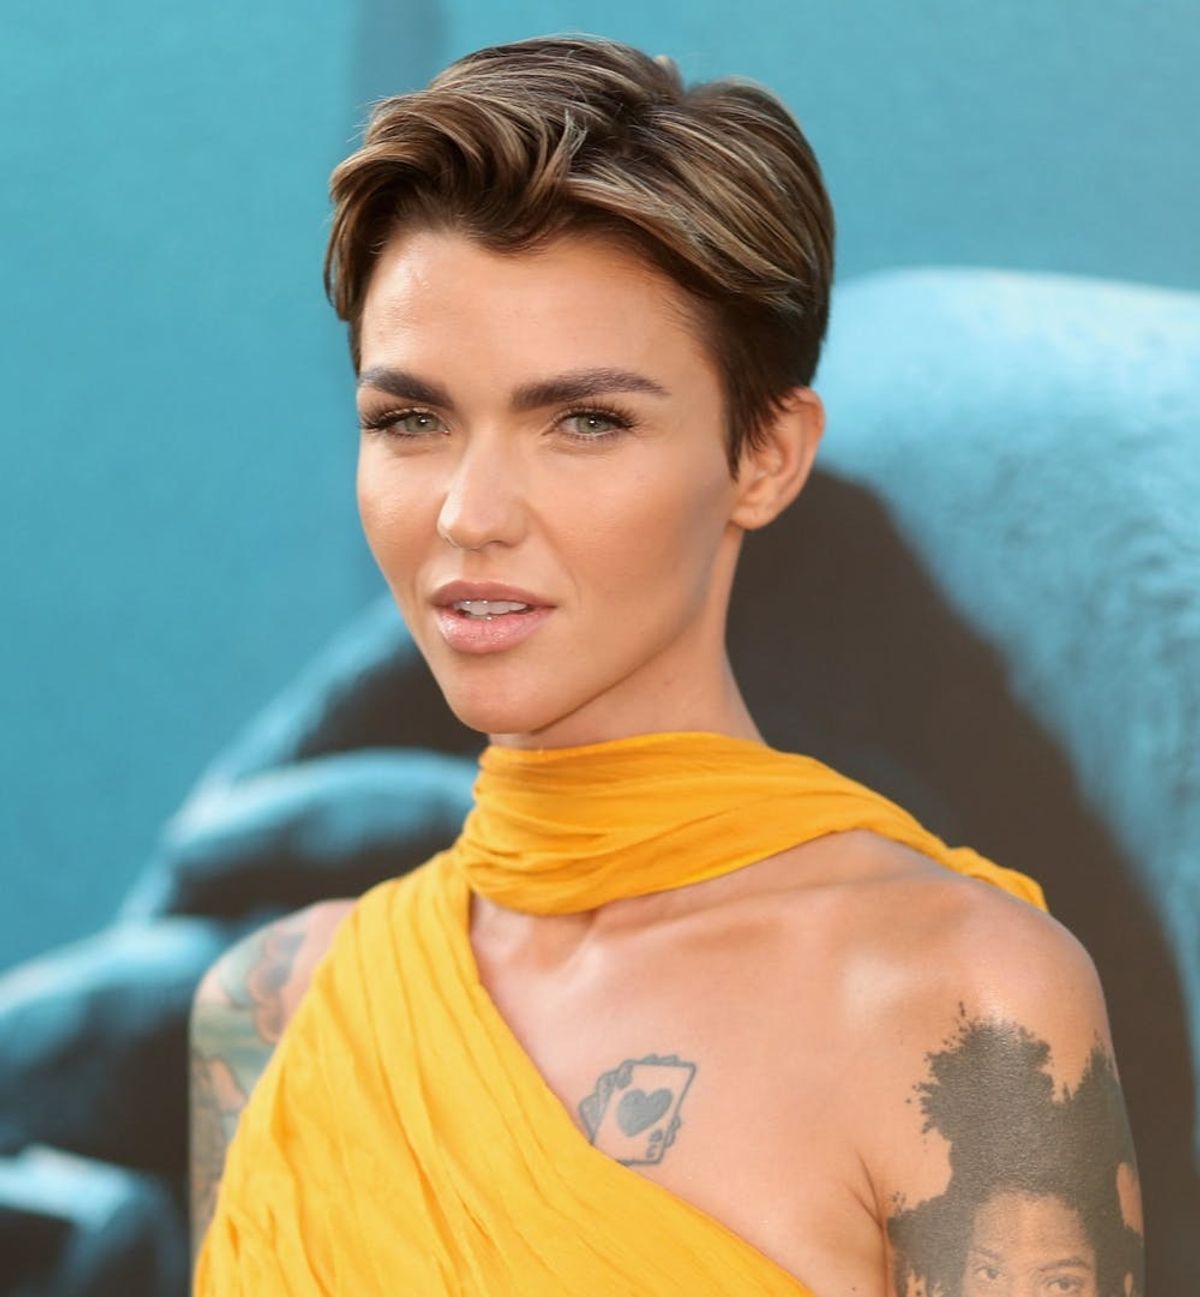 Here’s Your First Look at Ruby Rose in Costume as Batwoman